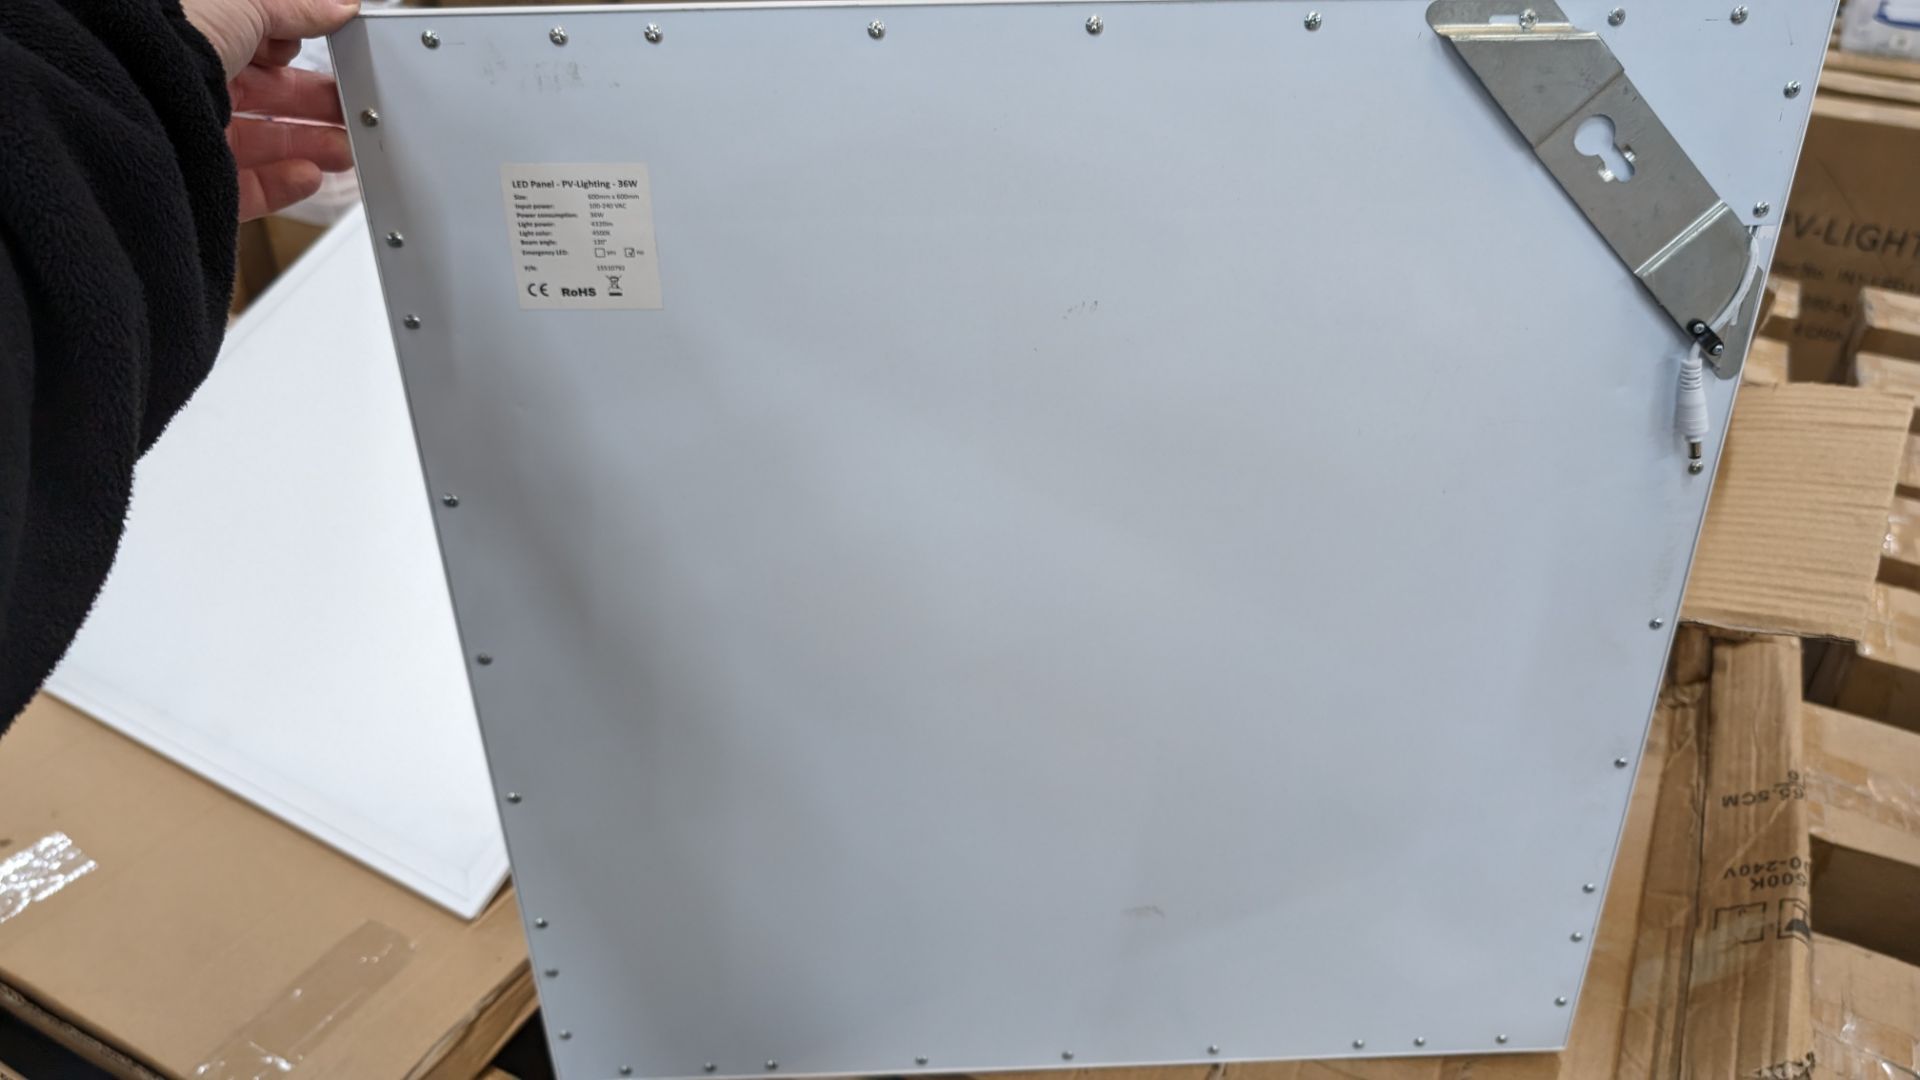 18 off 600mm x 600mm 36w 4500k 4320 lumens LED lighting panels. 36w drivers. This lot comprises 4 - Image 9 of 16